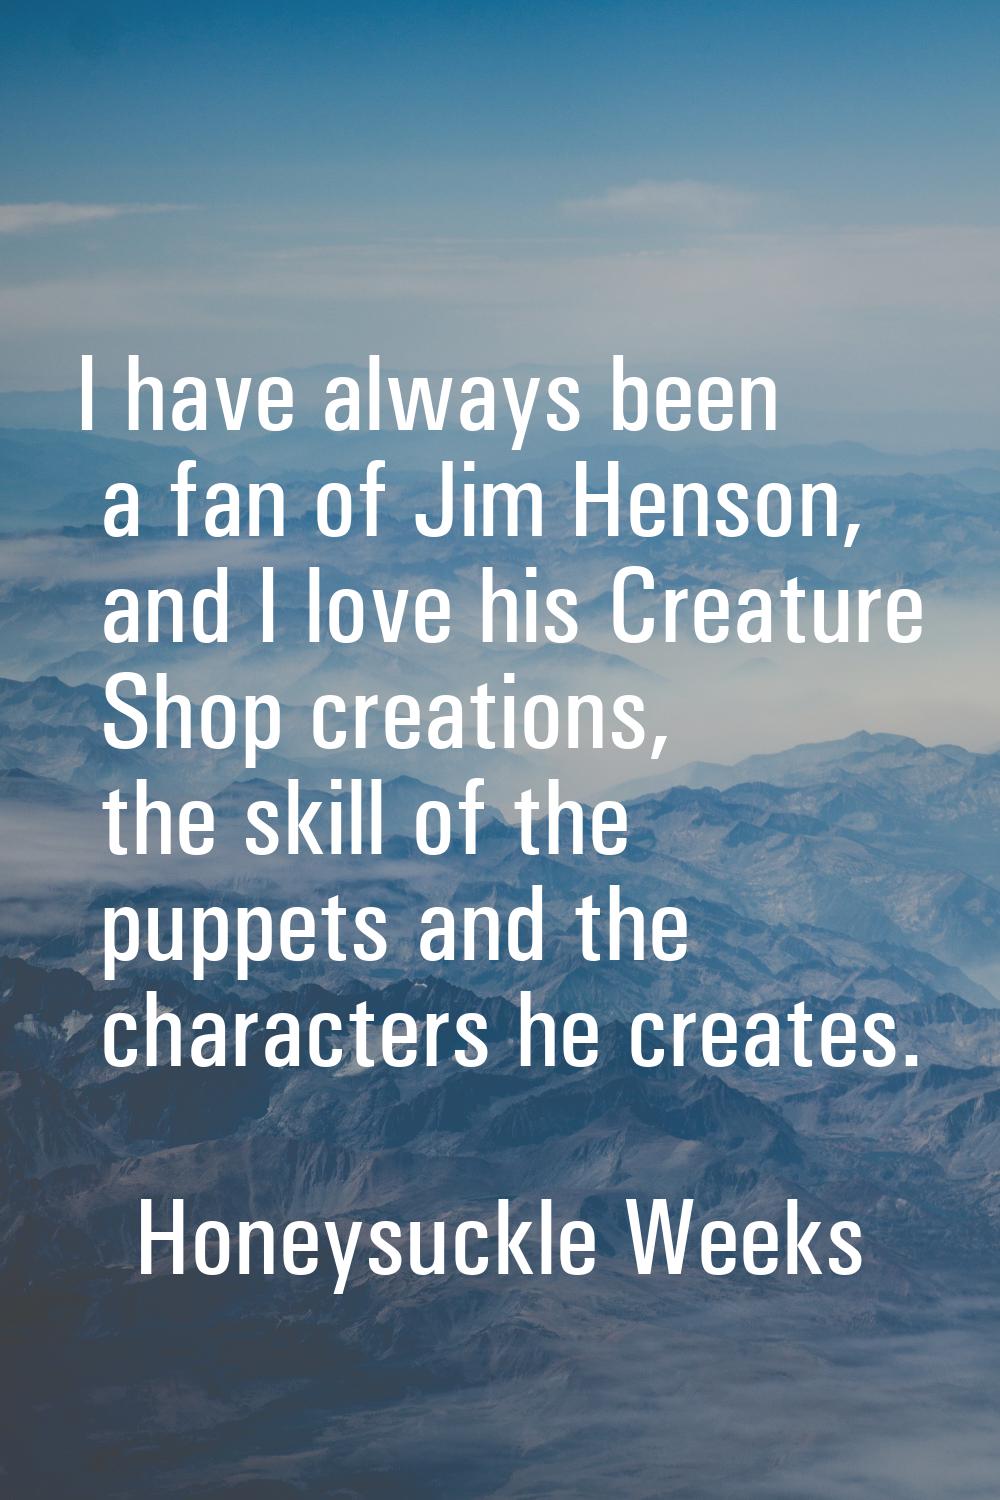 I have always been a fan of Jim Henson, and I love his Creature Shop creations, the skill of the pu